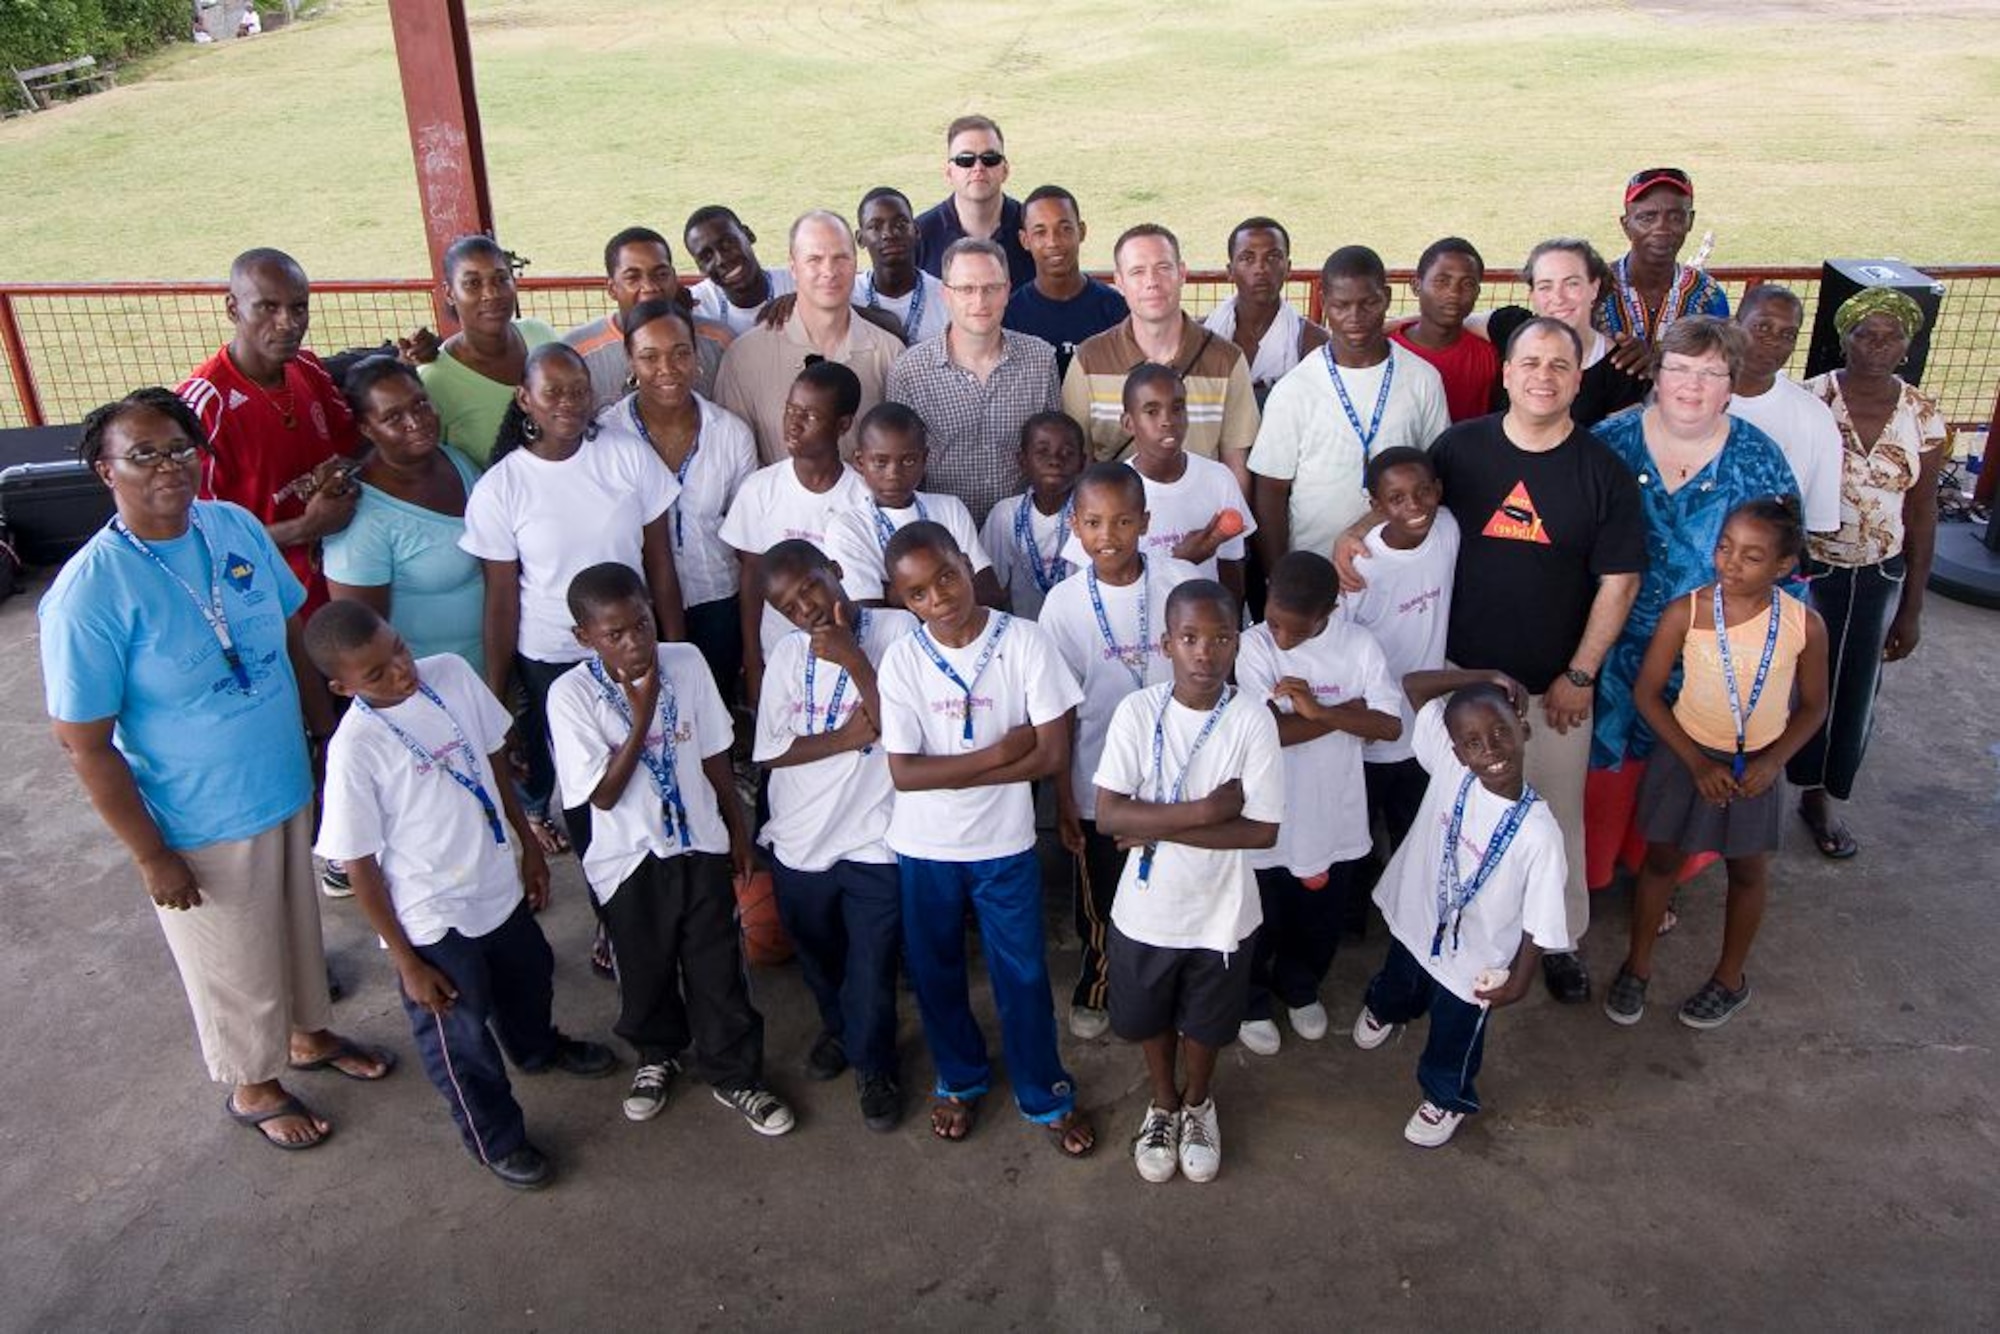 VICTORIA, Grenada -- Caretakers, children, volunteers and Airmen from the U.S. Air Force Academy Band “Blue Steel” pose for a group photograph in Victoria, Grenada, June 1.  Blue Steel spent the day with orphans from Father Mallaghan’s Home for Boys before performing a public concert in the center of the village.  The community outreach event is part of Operation Southern Partner, an Air Forces Southern-led event aimed at strengthening partnerships with nations in the U.S. Southern Command area of focus through mil-to-mil subject matter exchanges.  In addition to the exchange program, Airmen also had the opportunity to volunteer at various charitable and community organizations in each host nation.(Photo courtesy of Sagar Pathak of HorizontalRain.com) 